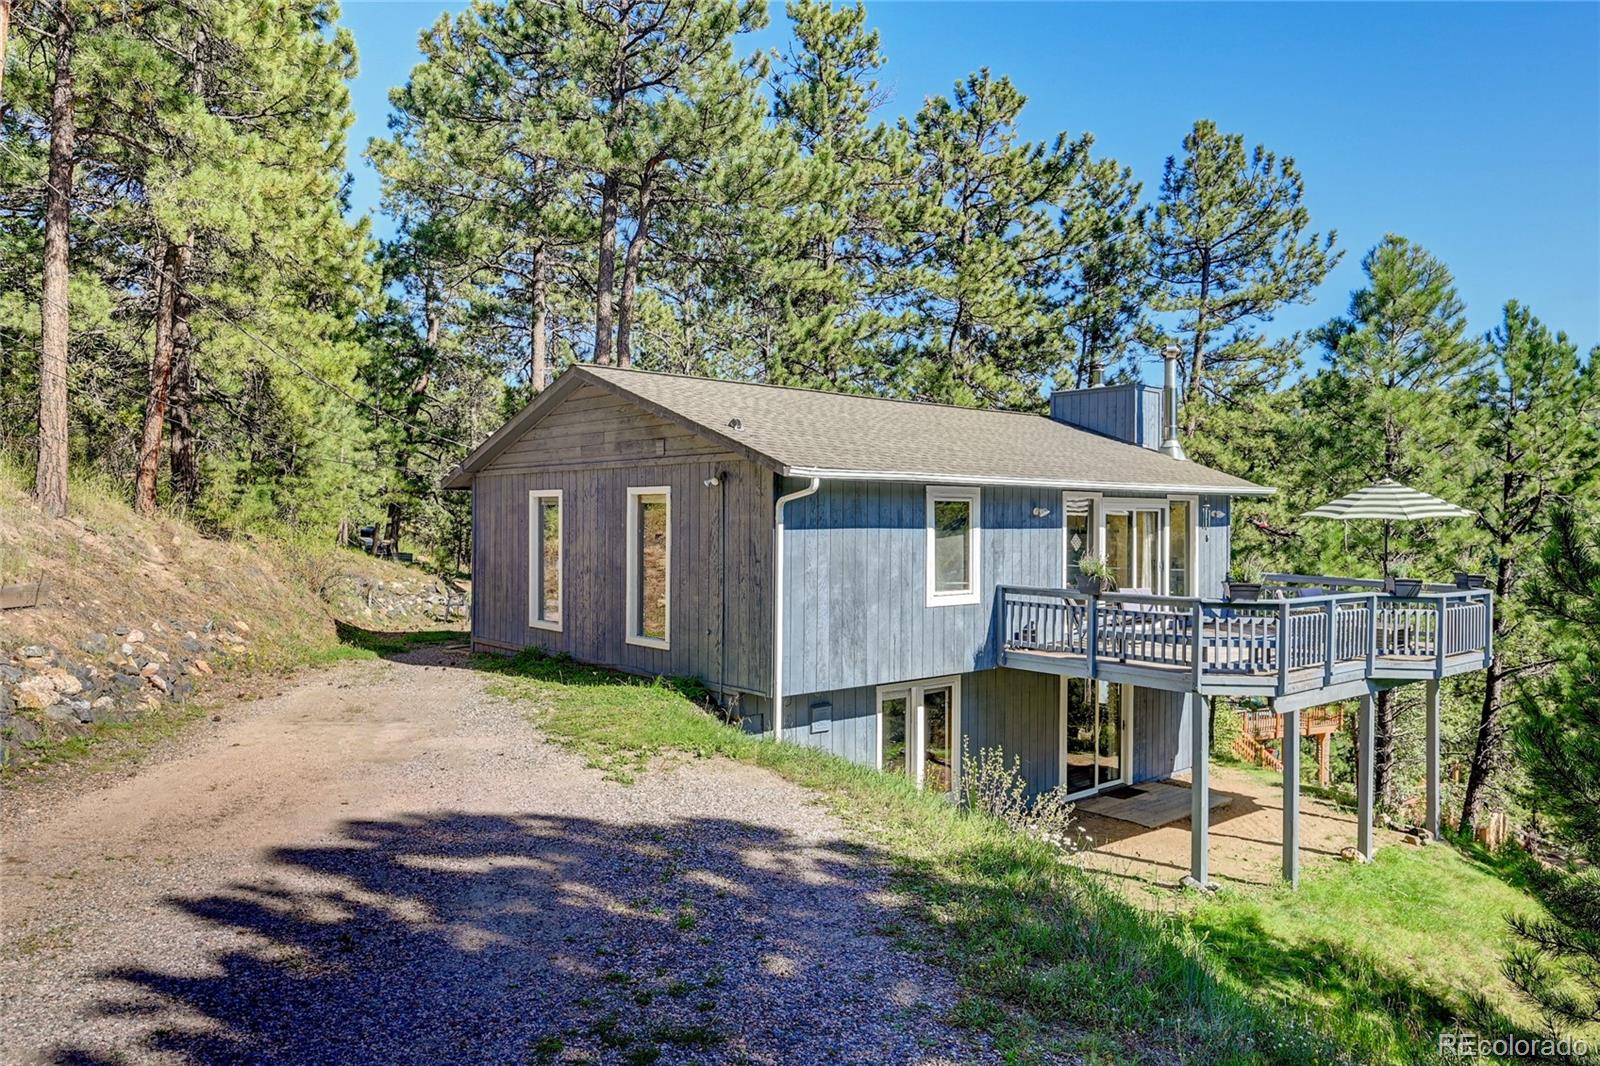 32908  little cub road, evergreen sold home. Closed on 2023-11-30 for $699,000.